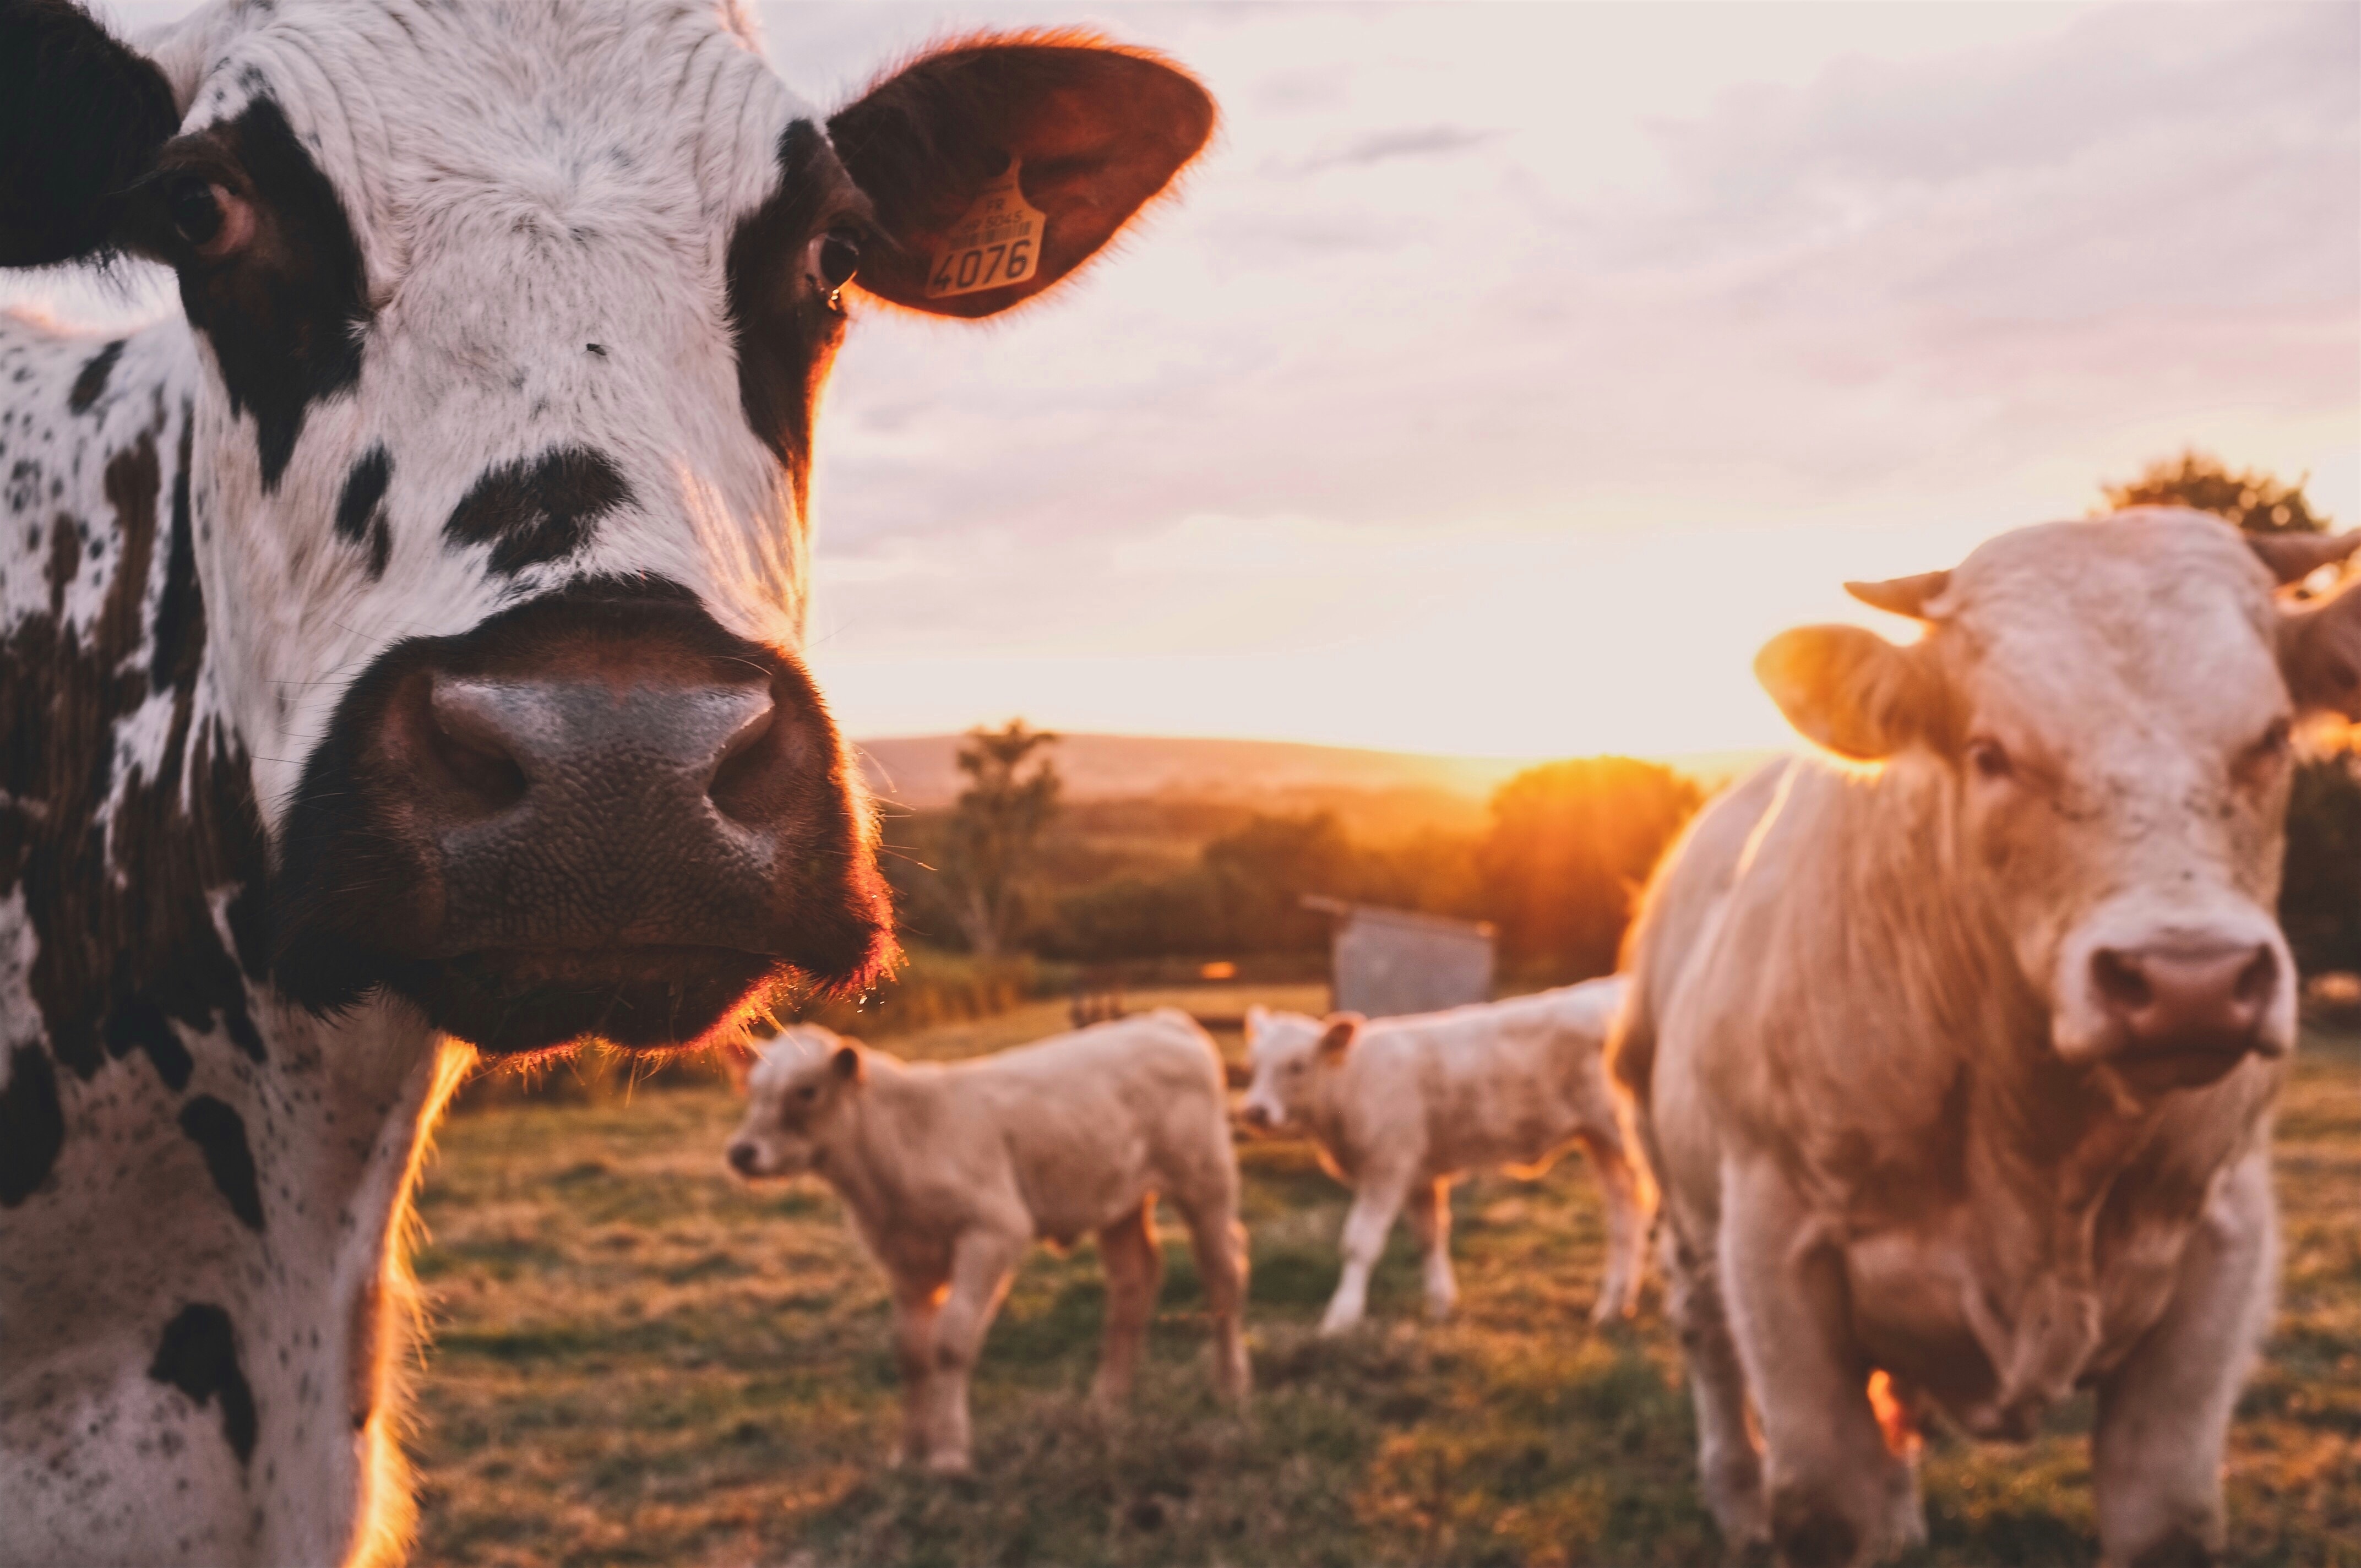 Cattle farming contributes to methane emissions.